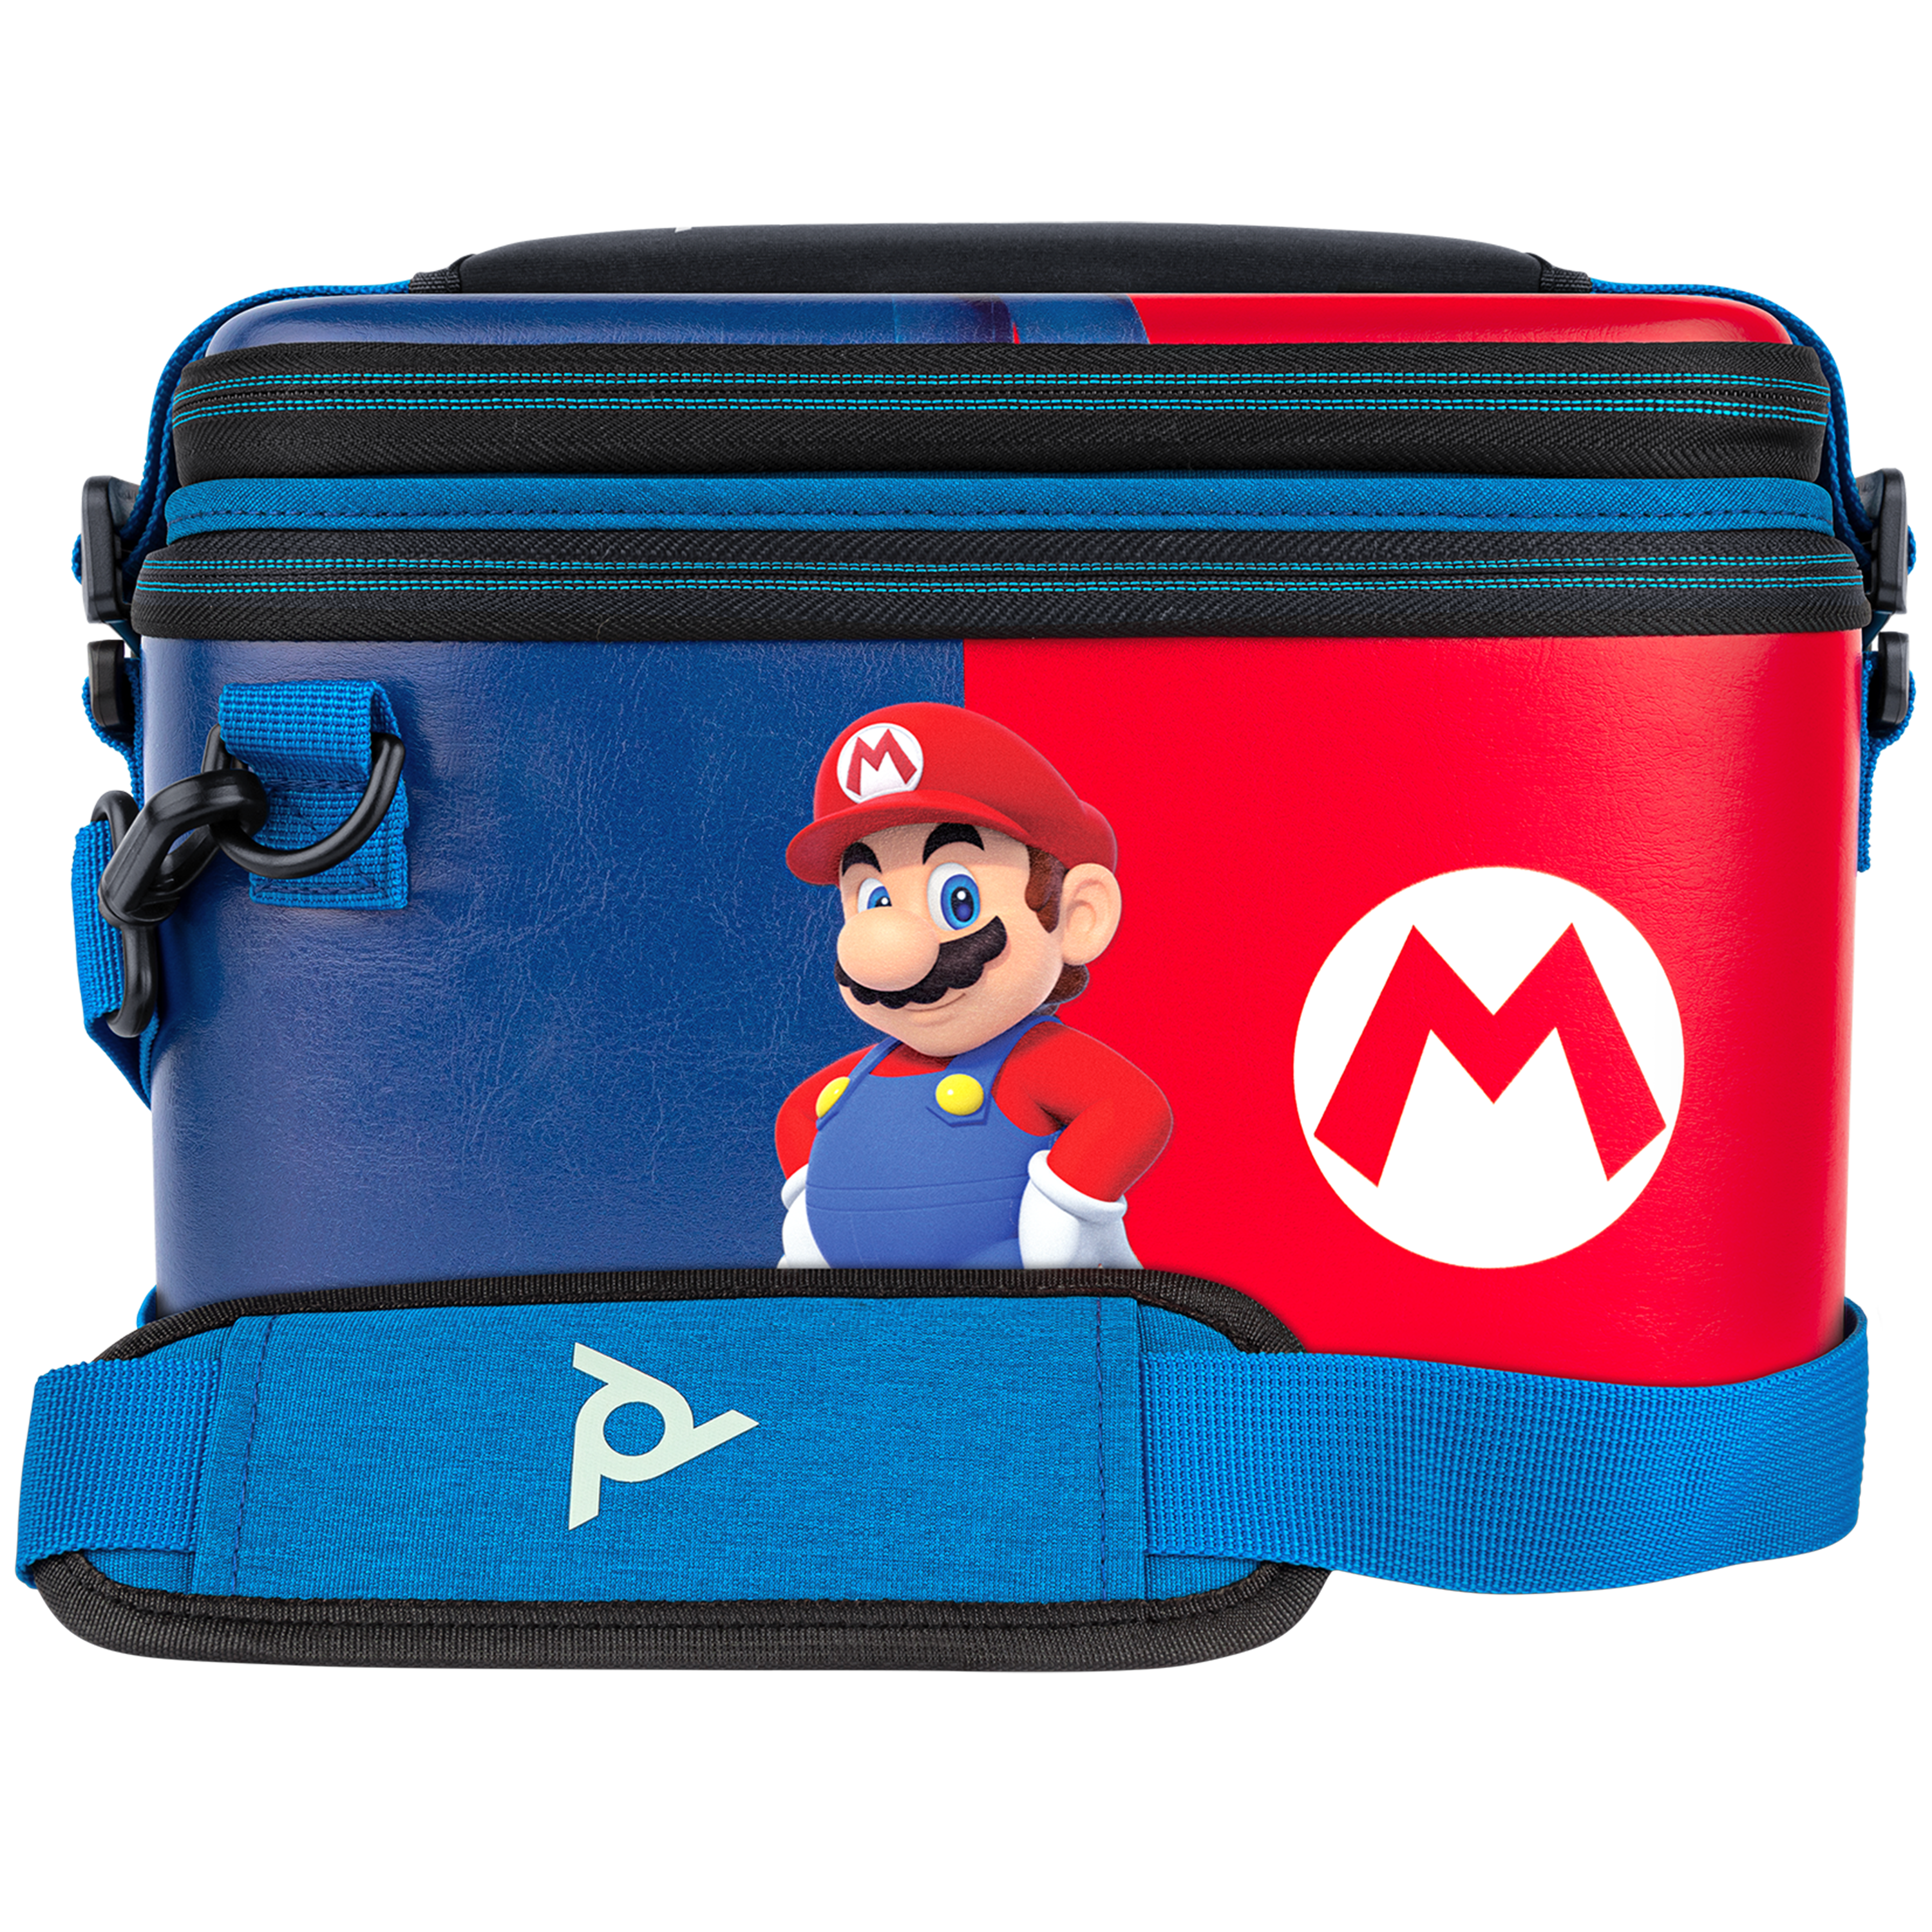 Canberra snel radioactiviteit Nintendo Switch Mario Overnight Case by PDP